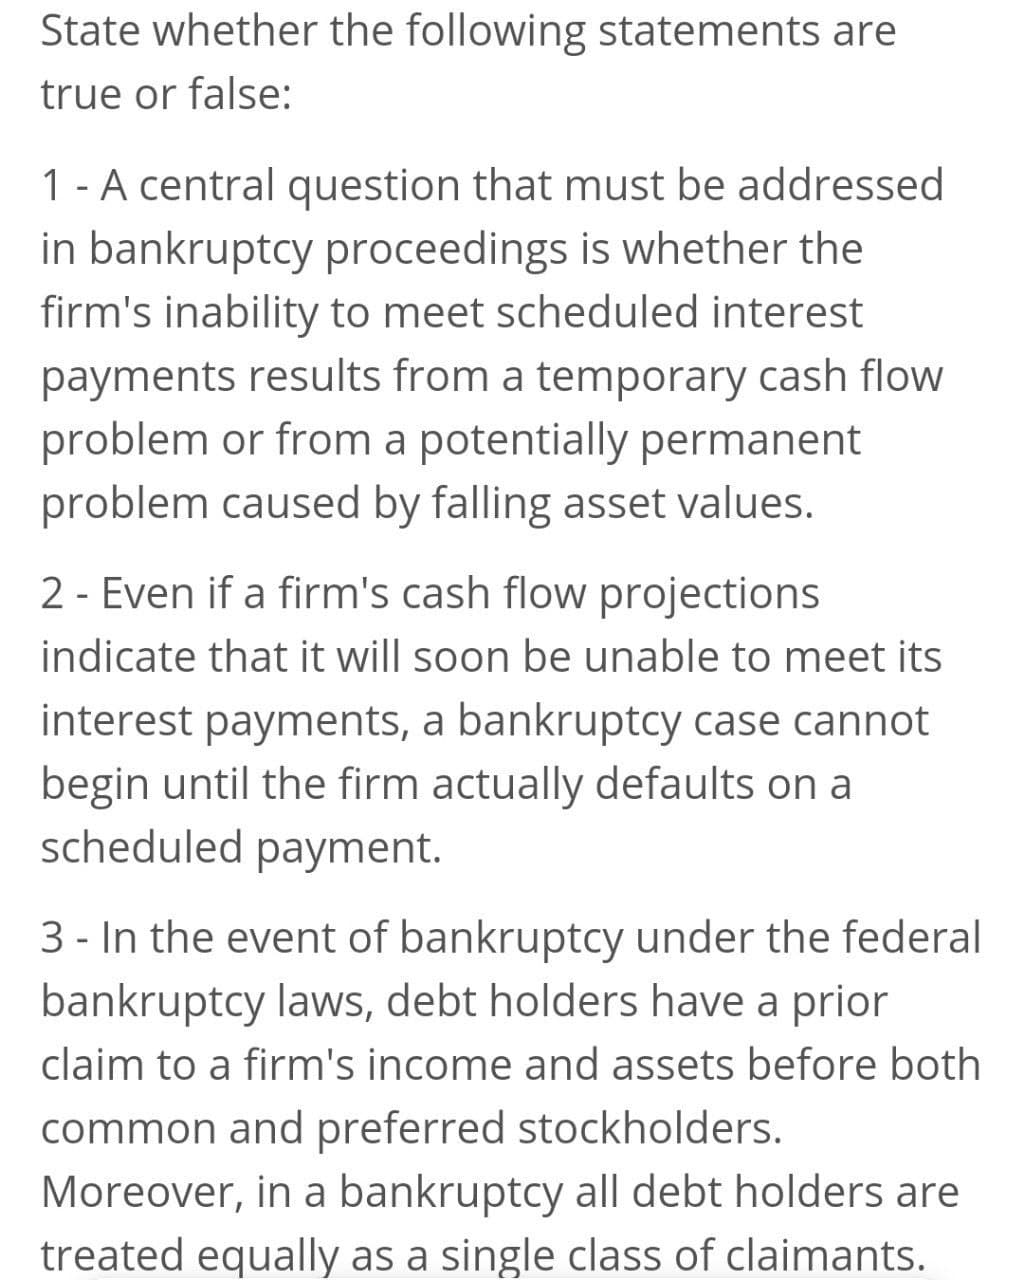 State whether the following statements are
true or false:
1- A central question that must be addressed
in bankruptcy proceedings is whether the
firm's inability to meet scheduled interest
payments results from a temporary cash flow
problem or from a potentially permanent
problem caused by falling asset values.
2 - Even if a firm's cash flow projections
indicate that it will soon be unable to meet its
interest payments, a bankruptcy case cannot
begin until the firm actually defaults on a
scheduled payment.
3 - In the event of bankruptcy under the federal
bankruptcy laws, debt holders have a prior
claim to a firm's income and assets before both
common and preferred stockholders.
Moreover, in a bankruptcy all debt holders are
treated equally as a single class of claimants.
